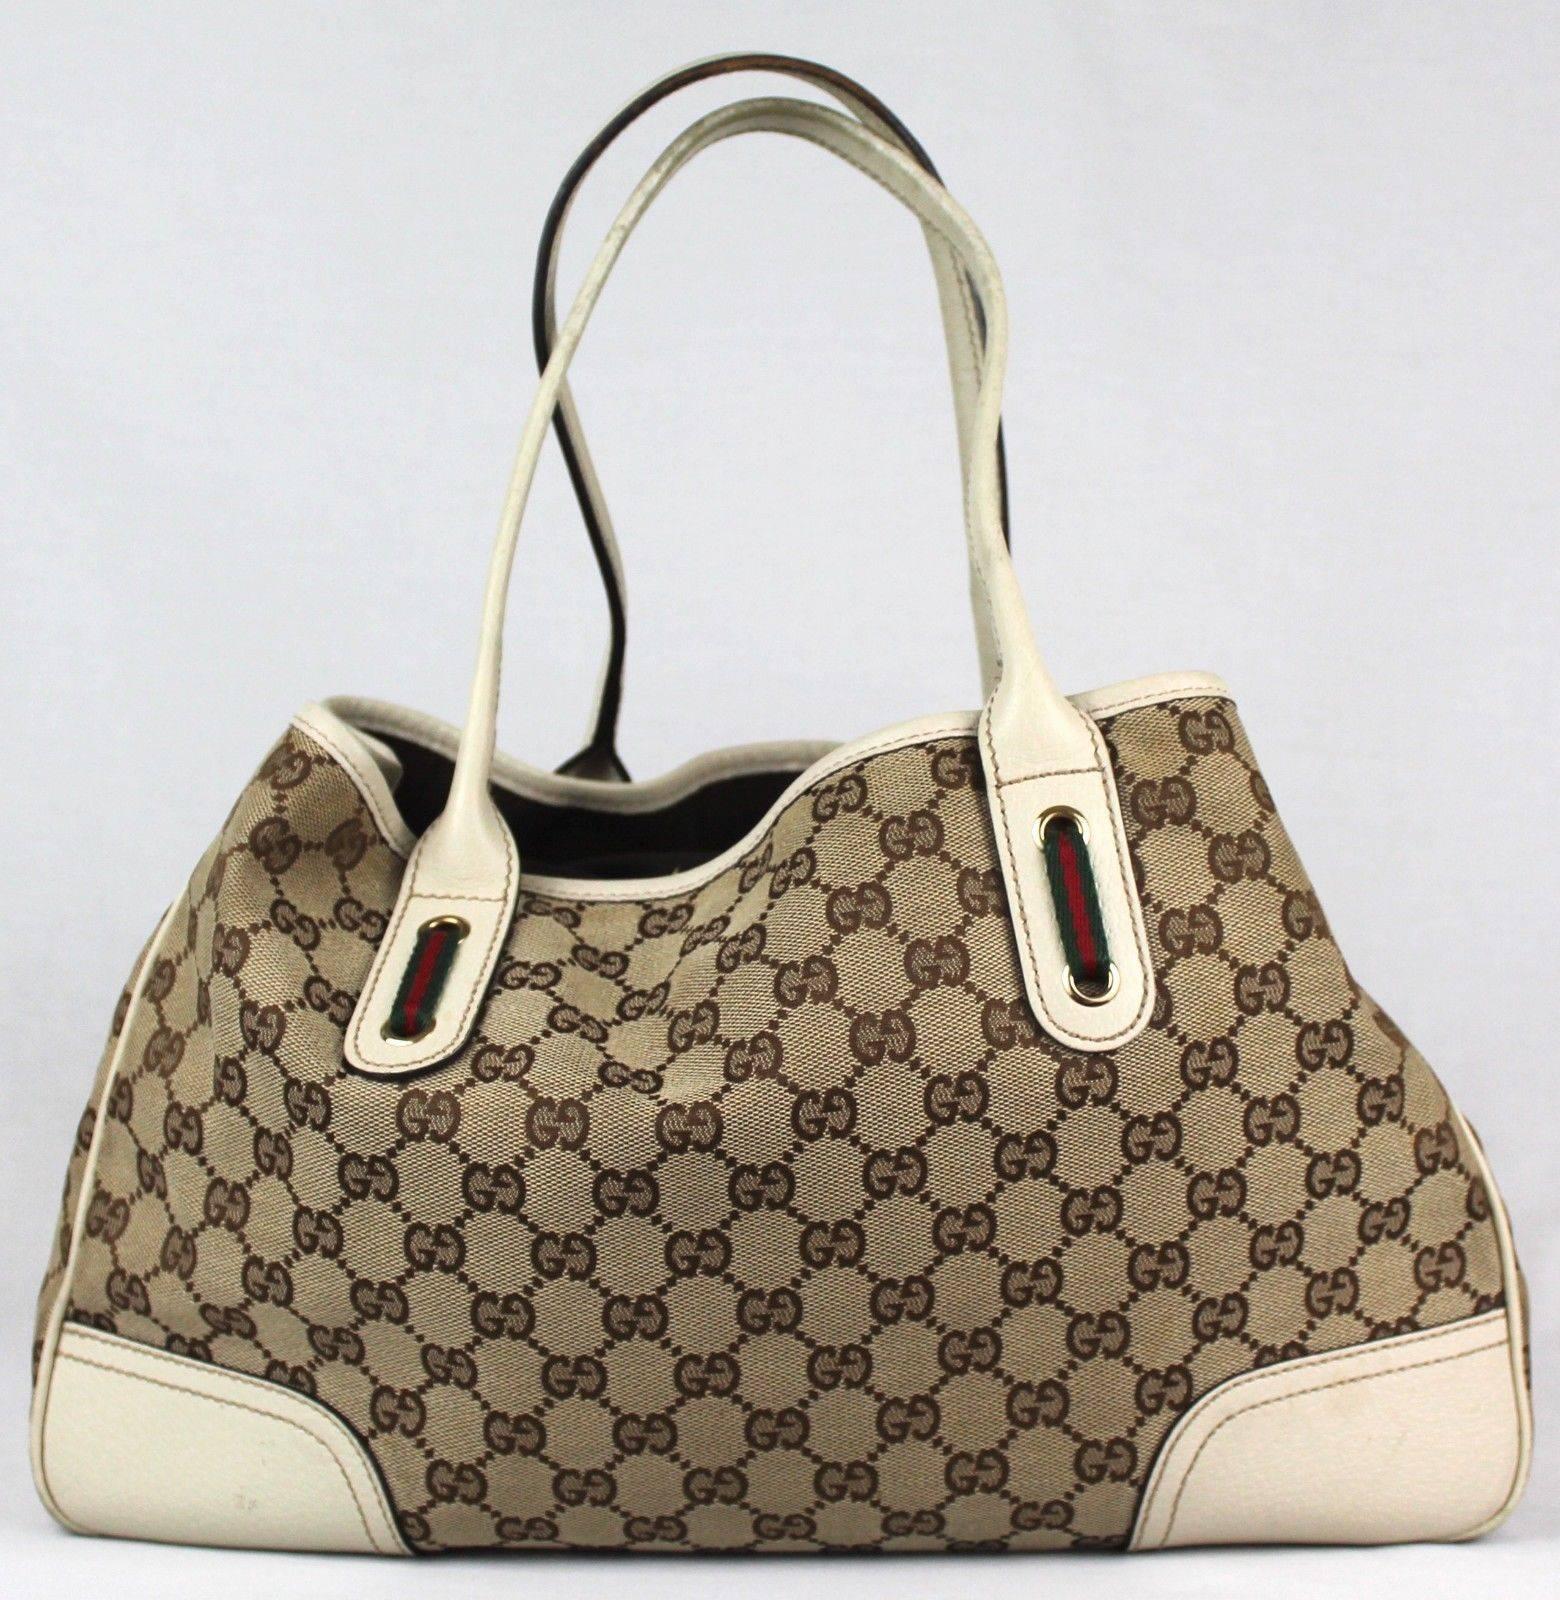 -Beautiful every day Princey Tote bag from Gucci
-Bag features iconic GG monogram in canvas with white leather corners and accents 
-Has tri-colored Gucci bow in the front 
-Closes with a snap strap and has 1 inner zip pocket 
-Comes with original